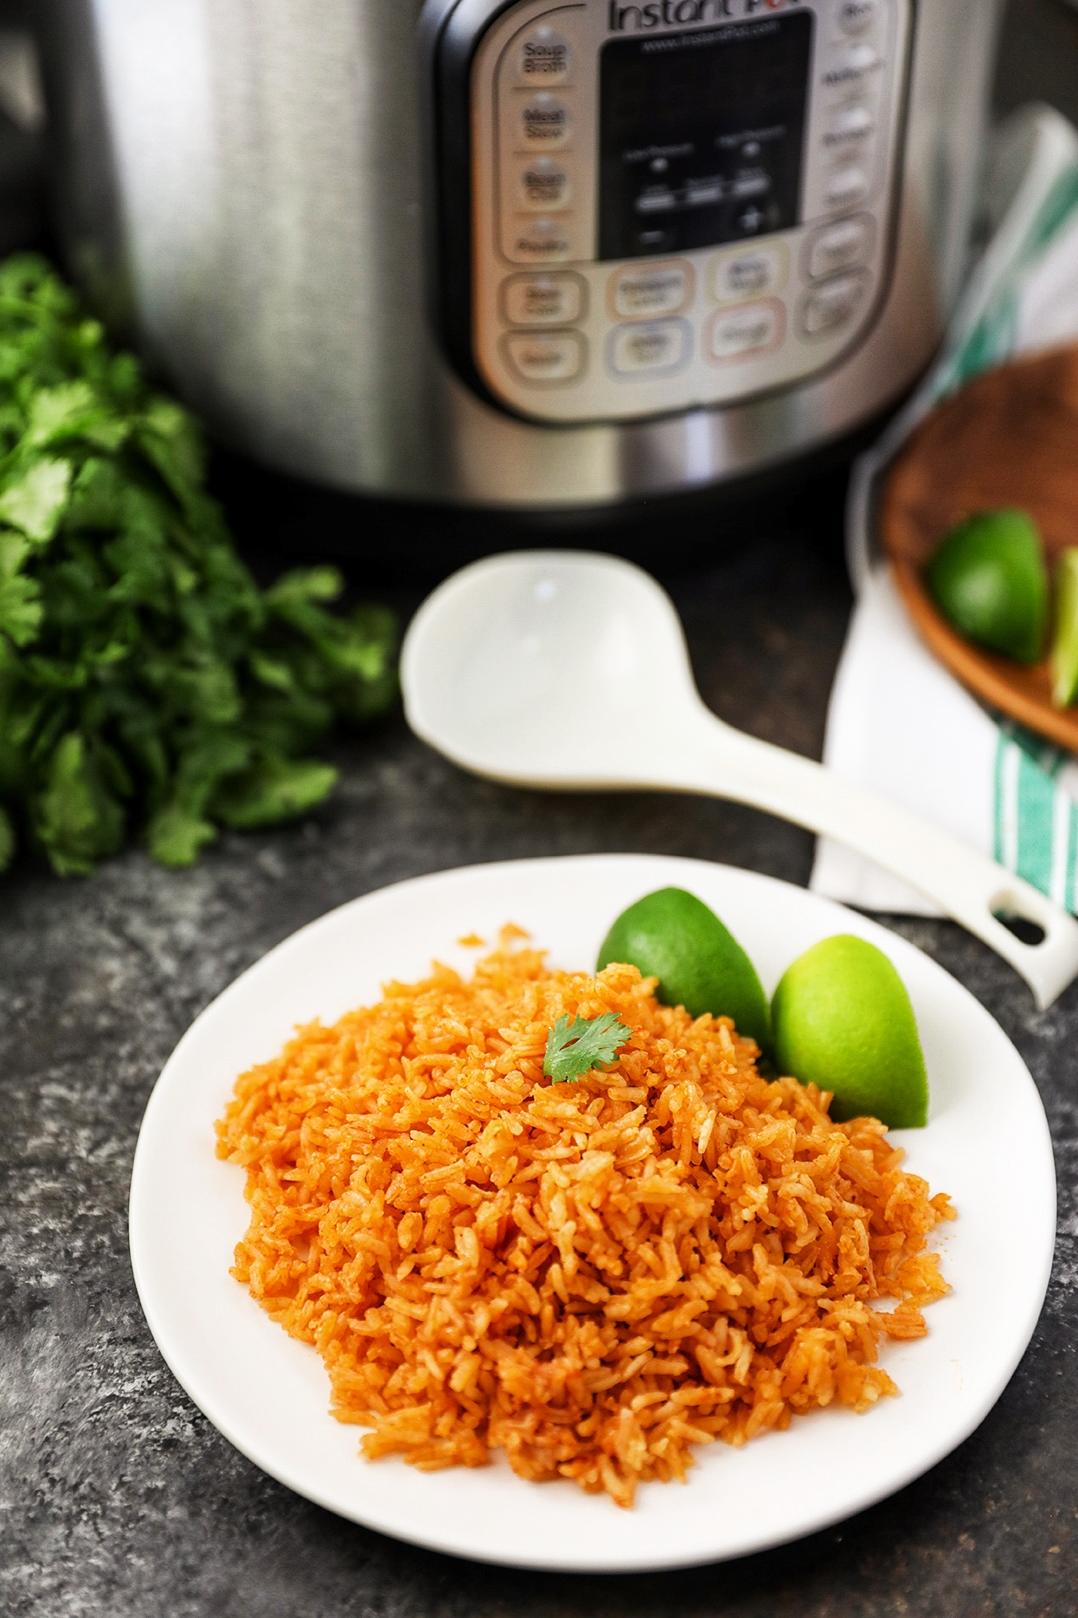  Spice up your dinner with this delicious Instant Pot Mexican Rice!